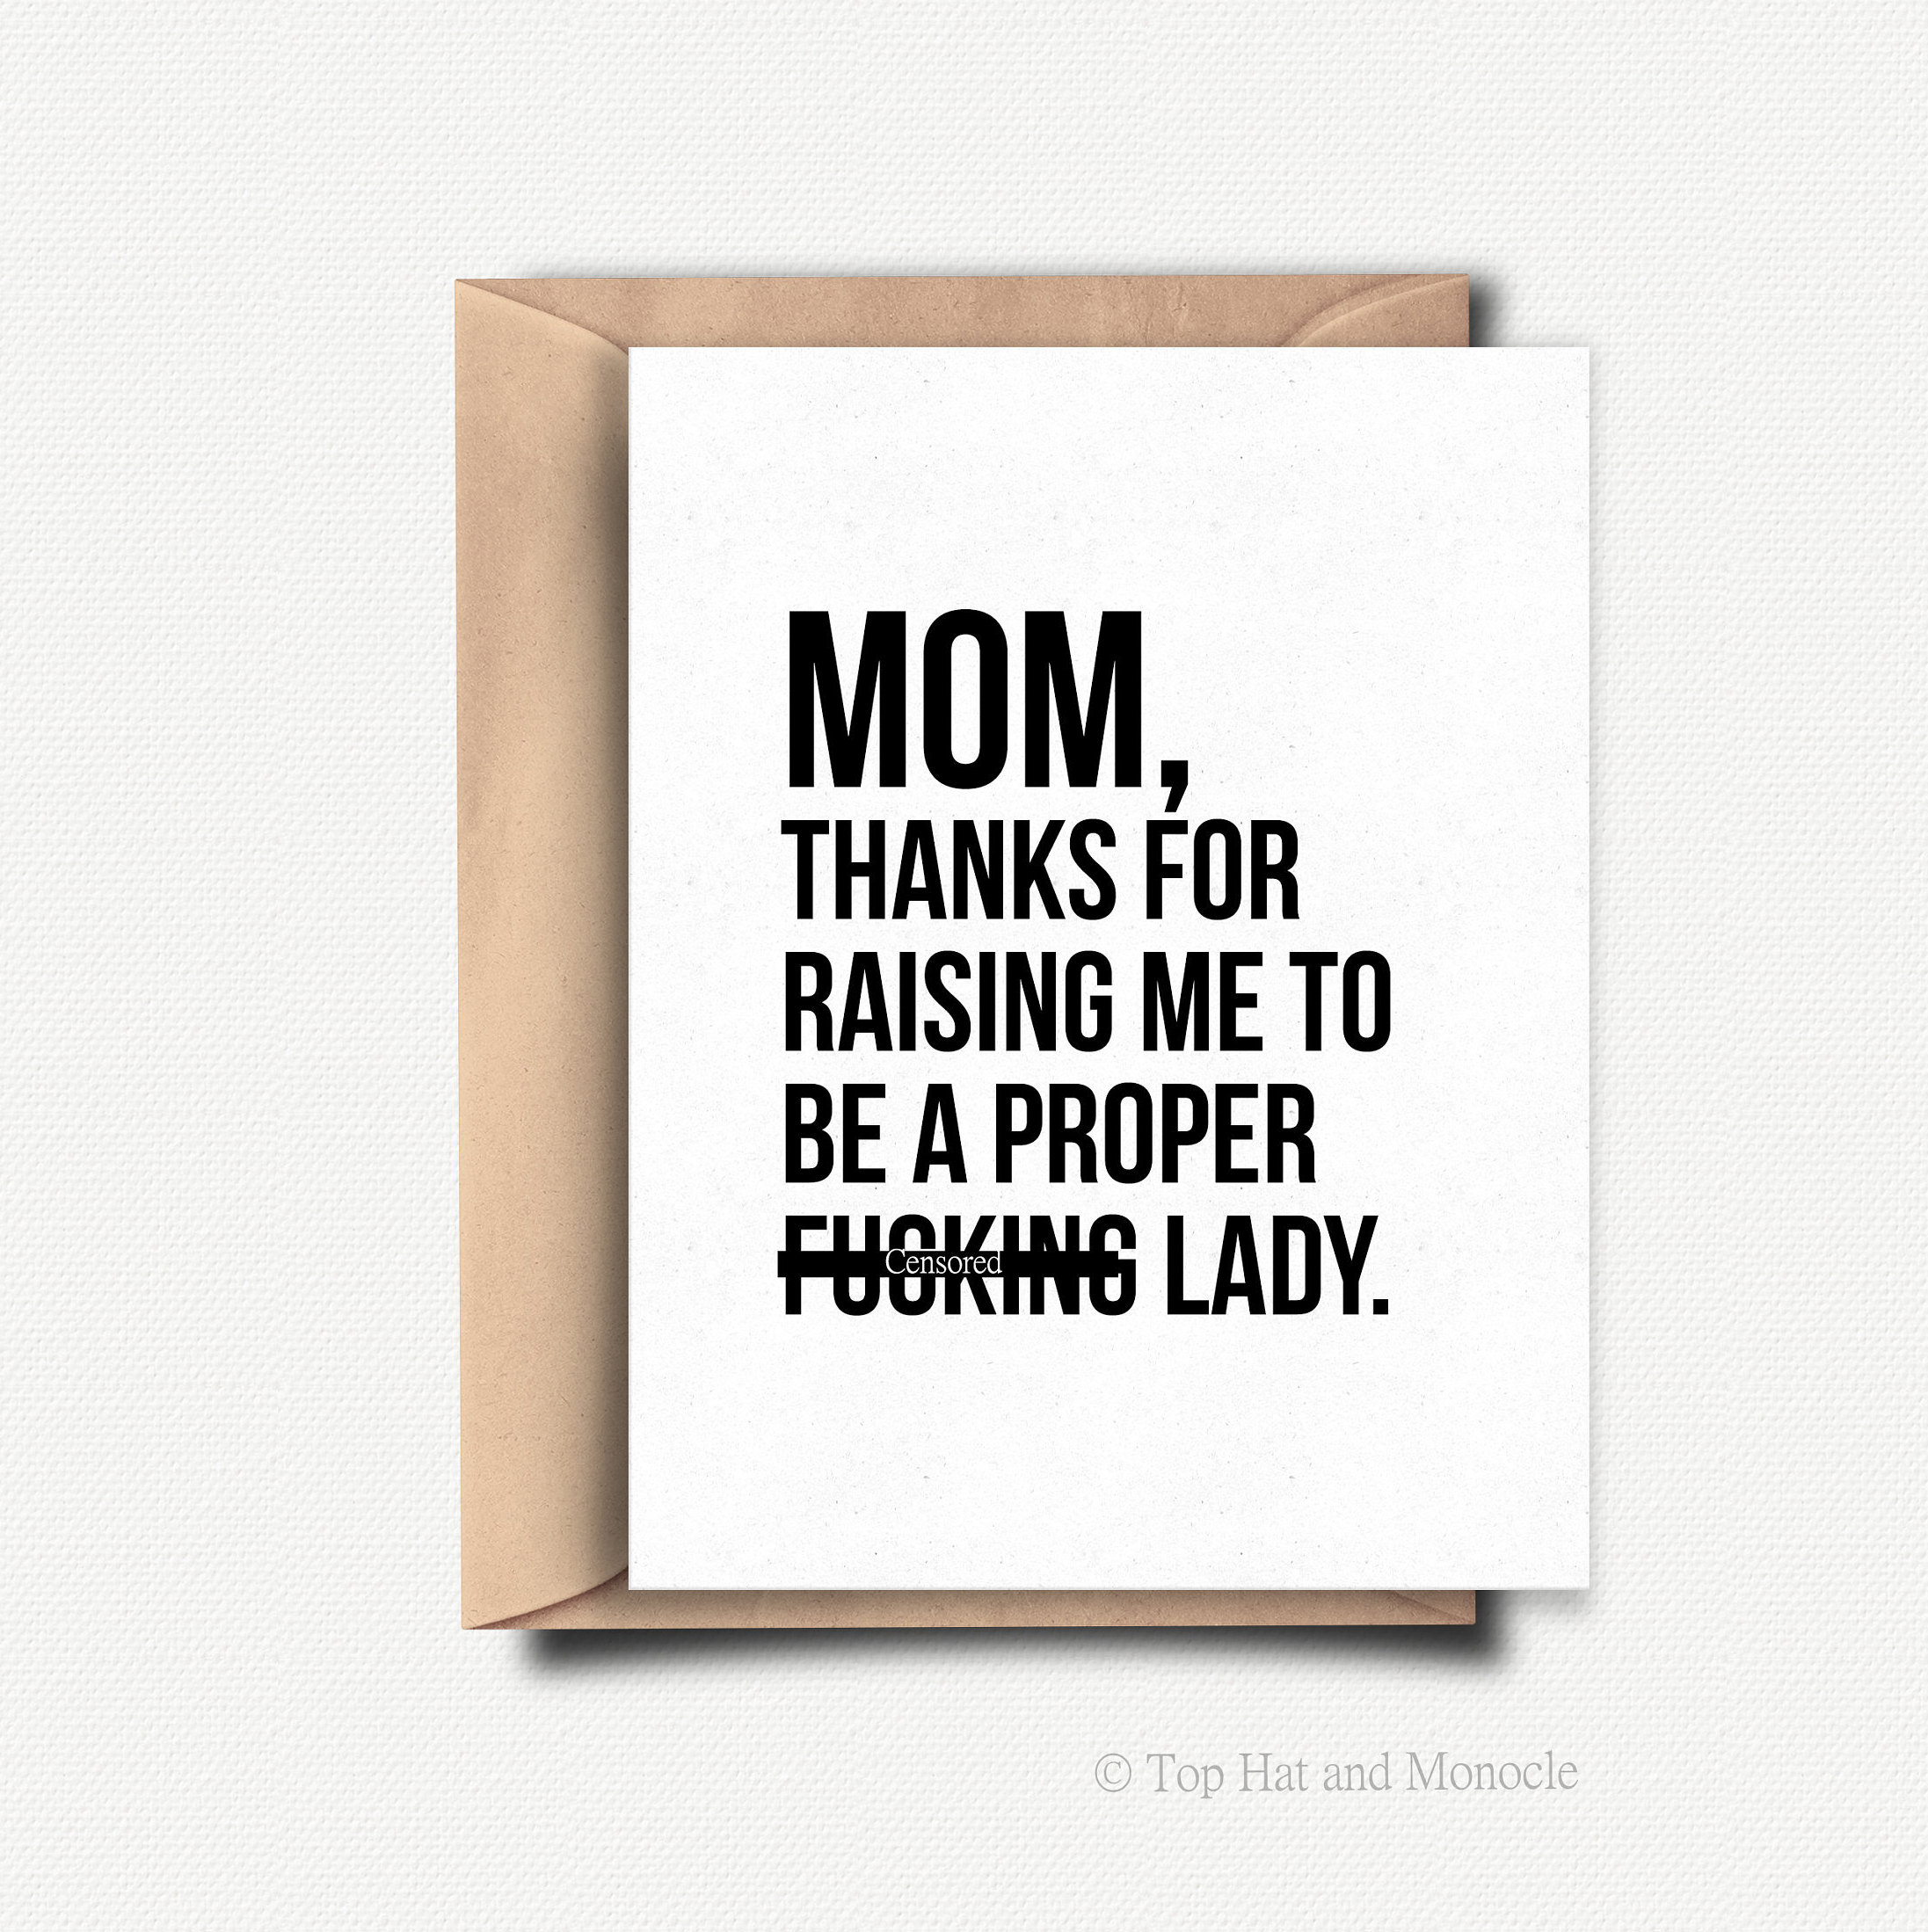 Mum Birthday Card Ideas Funny Mothers Day Card Funny Mothers Day Gift From Daughter Funny Mothers Day Gift Ideas Card For Mum Birthday Card From Daughter Mother